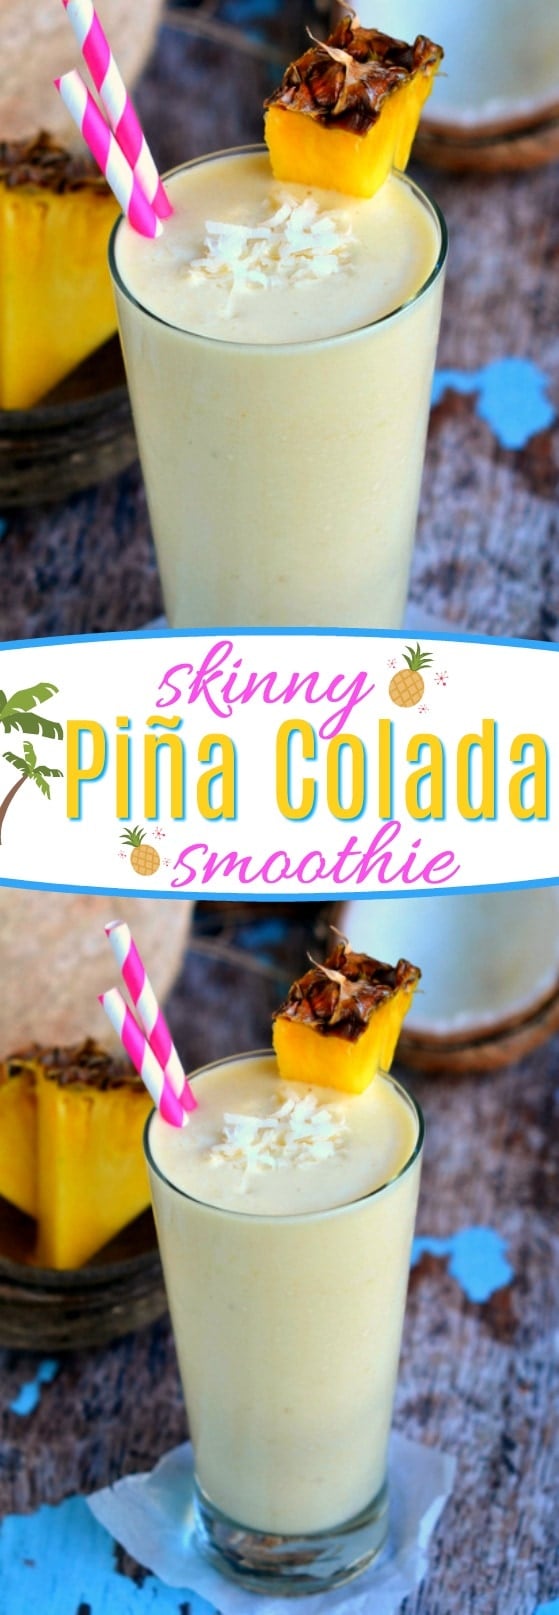 You are going to go coco-nuts for this delicious Skinny Pina Colada Smoothie made with Greek yogurt and lite coconut milk! Perfect for breakfast or after-school snacks! // Mom On Timeout #smoothie #recipe #skinny #coconut #pineapple #Greekyogurt #protein #breakfast